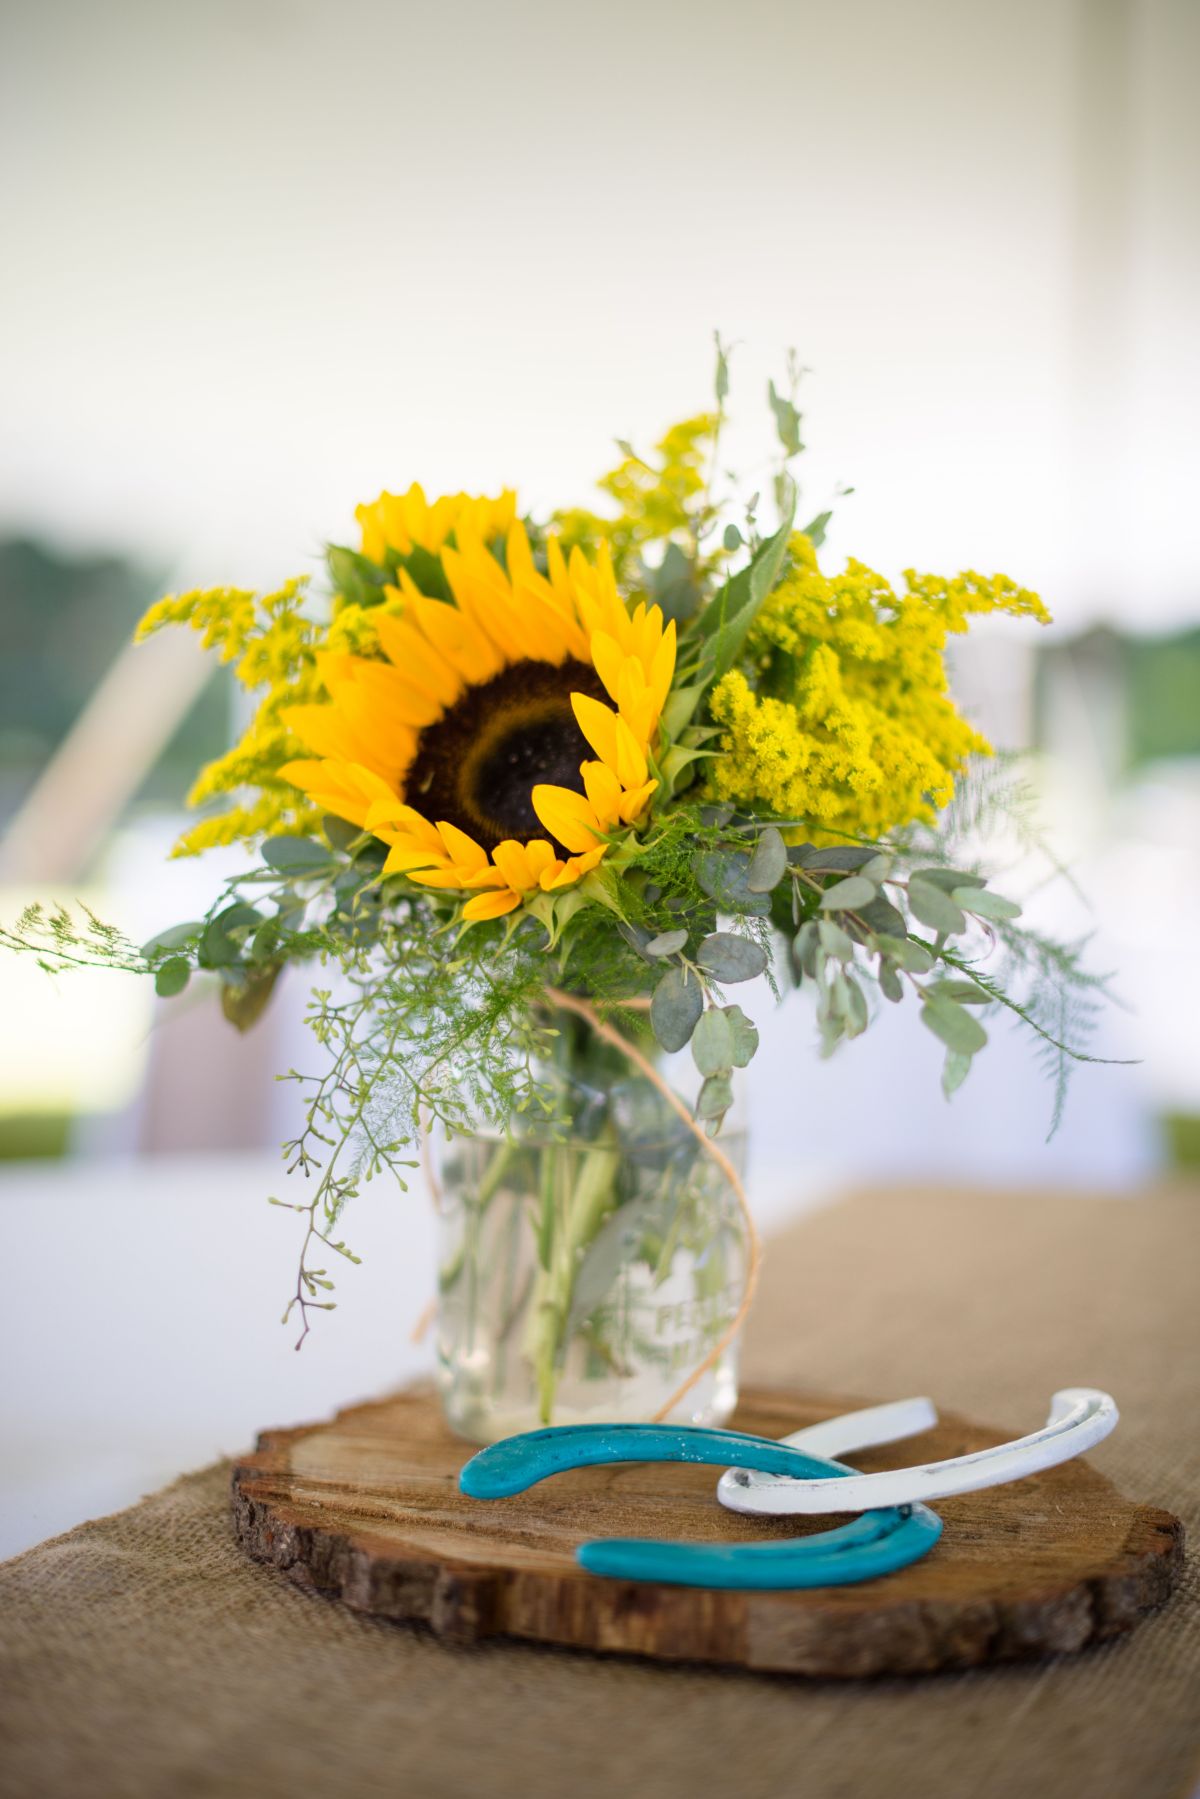 Rustic Wedding Centerpieces of Sunflowers in Mason Jars on Wood Slabs